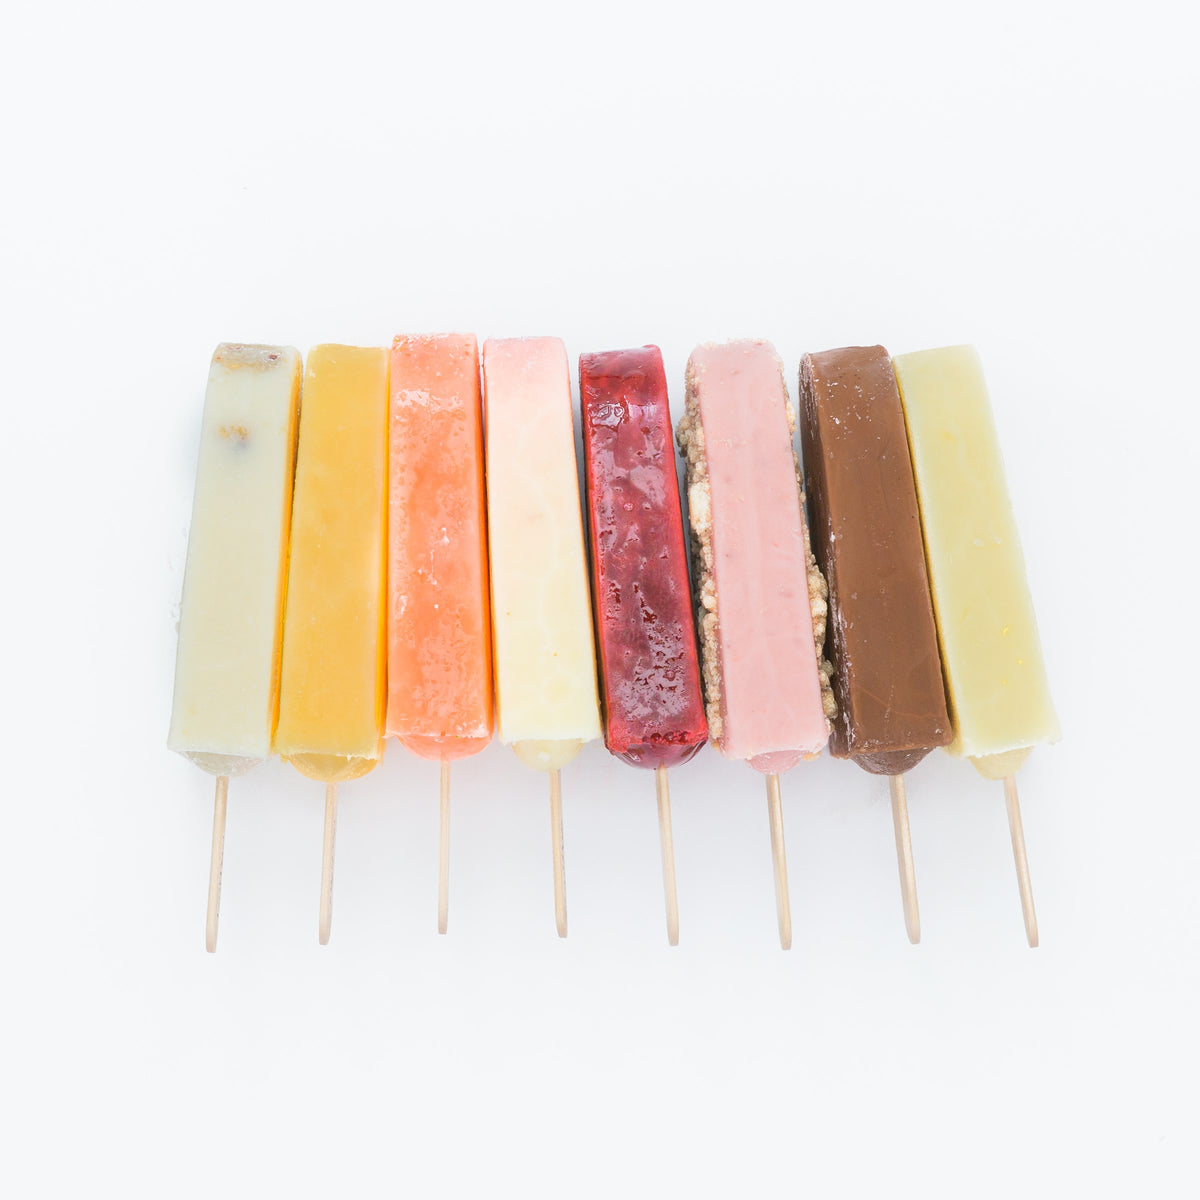 8 joy pop ice pops laying side by side next to each other on a white background